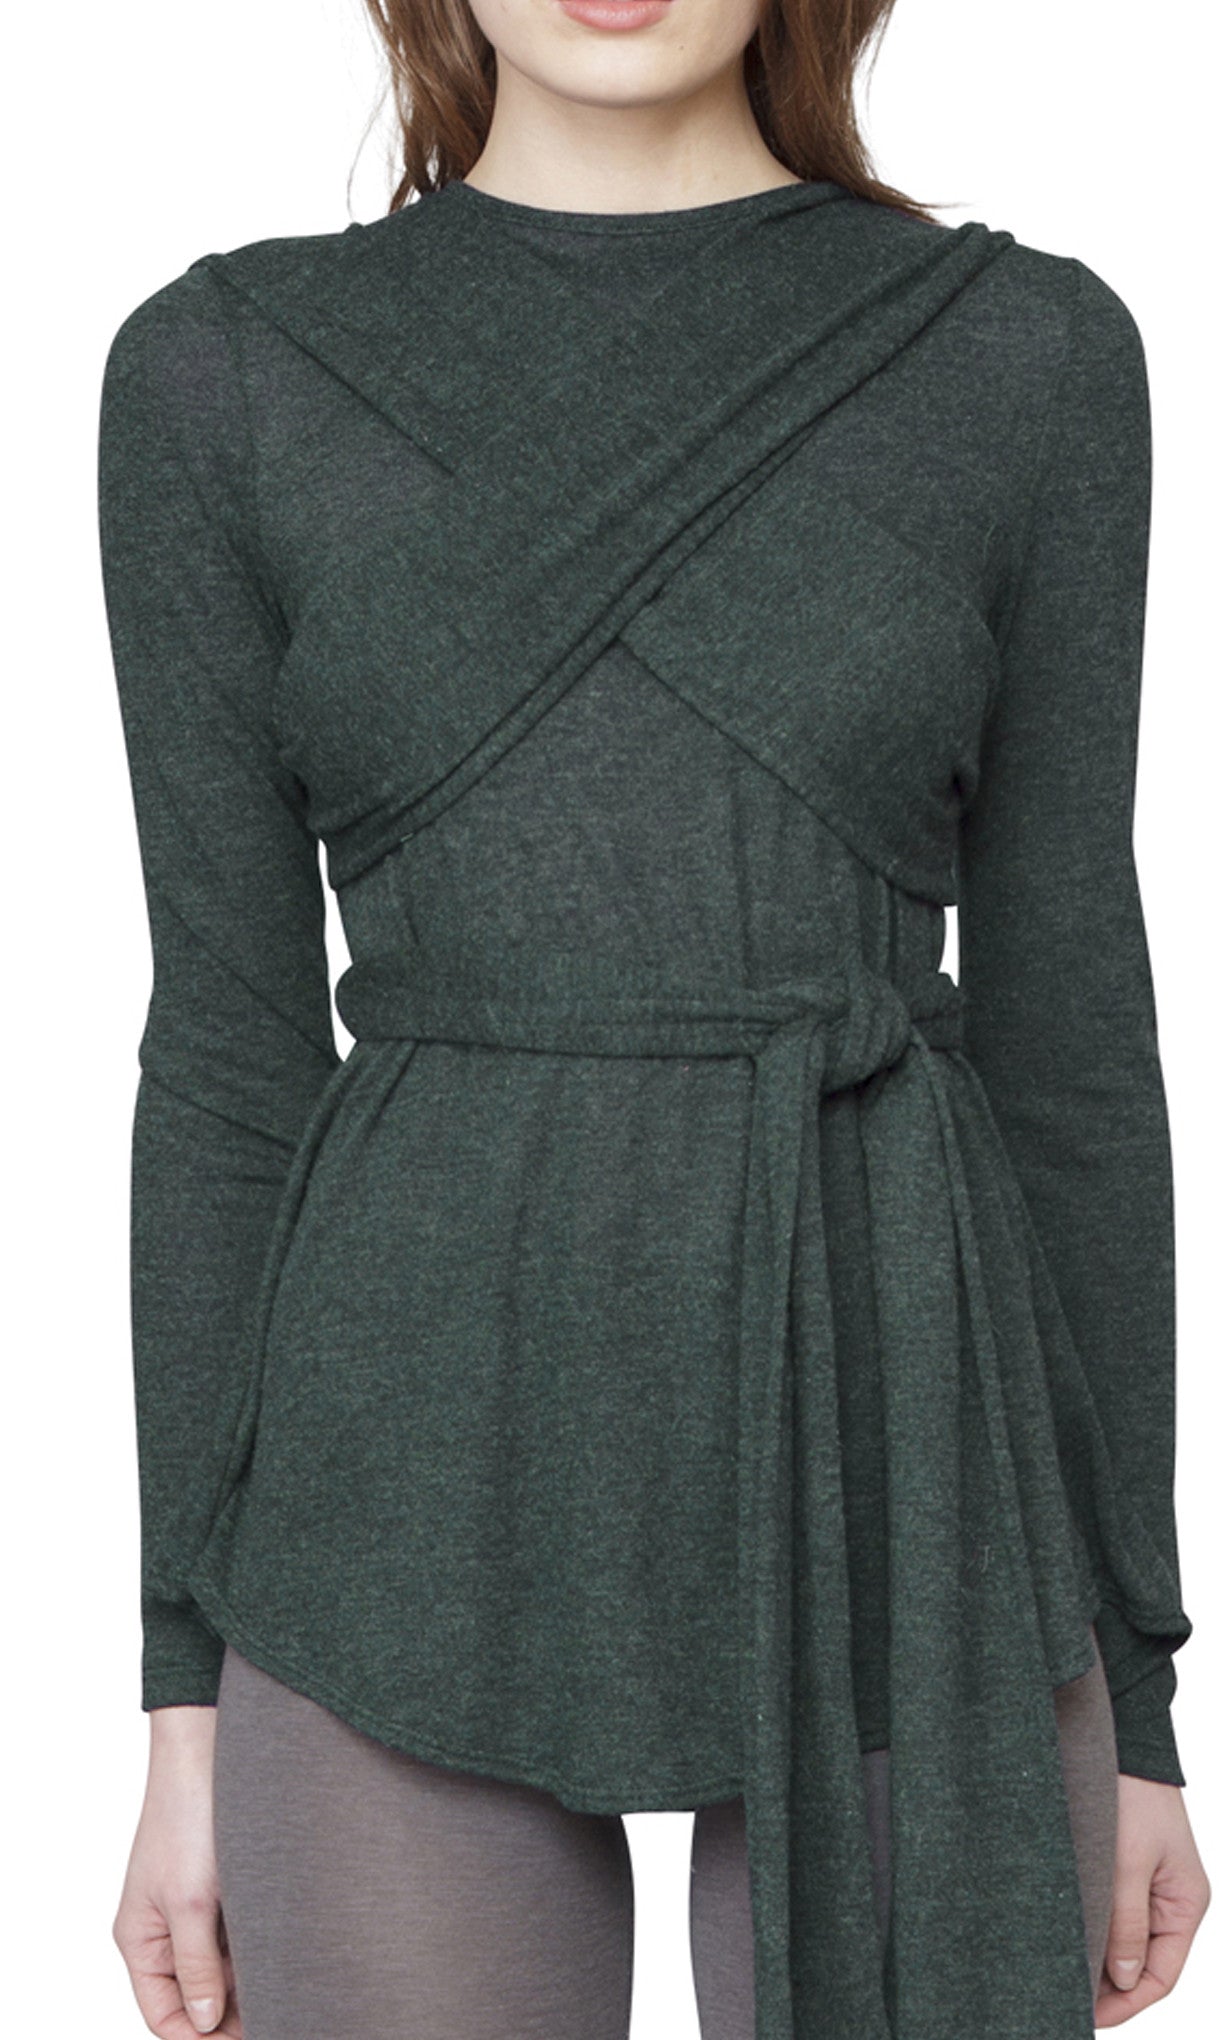 BEDFORD TOP - CHARCOAL